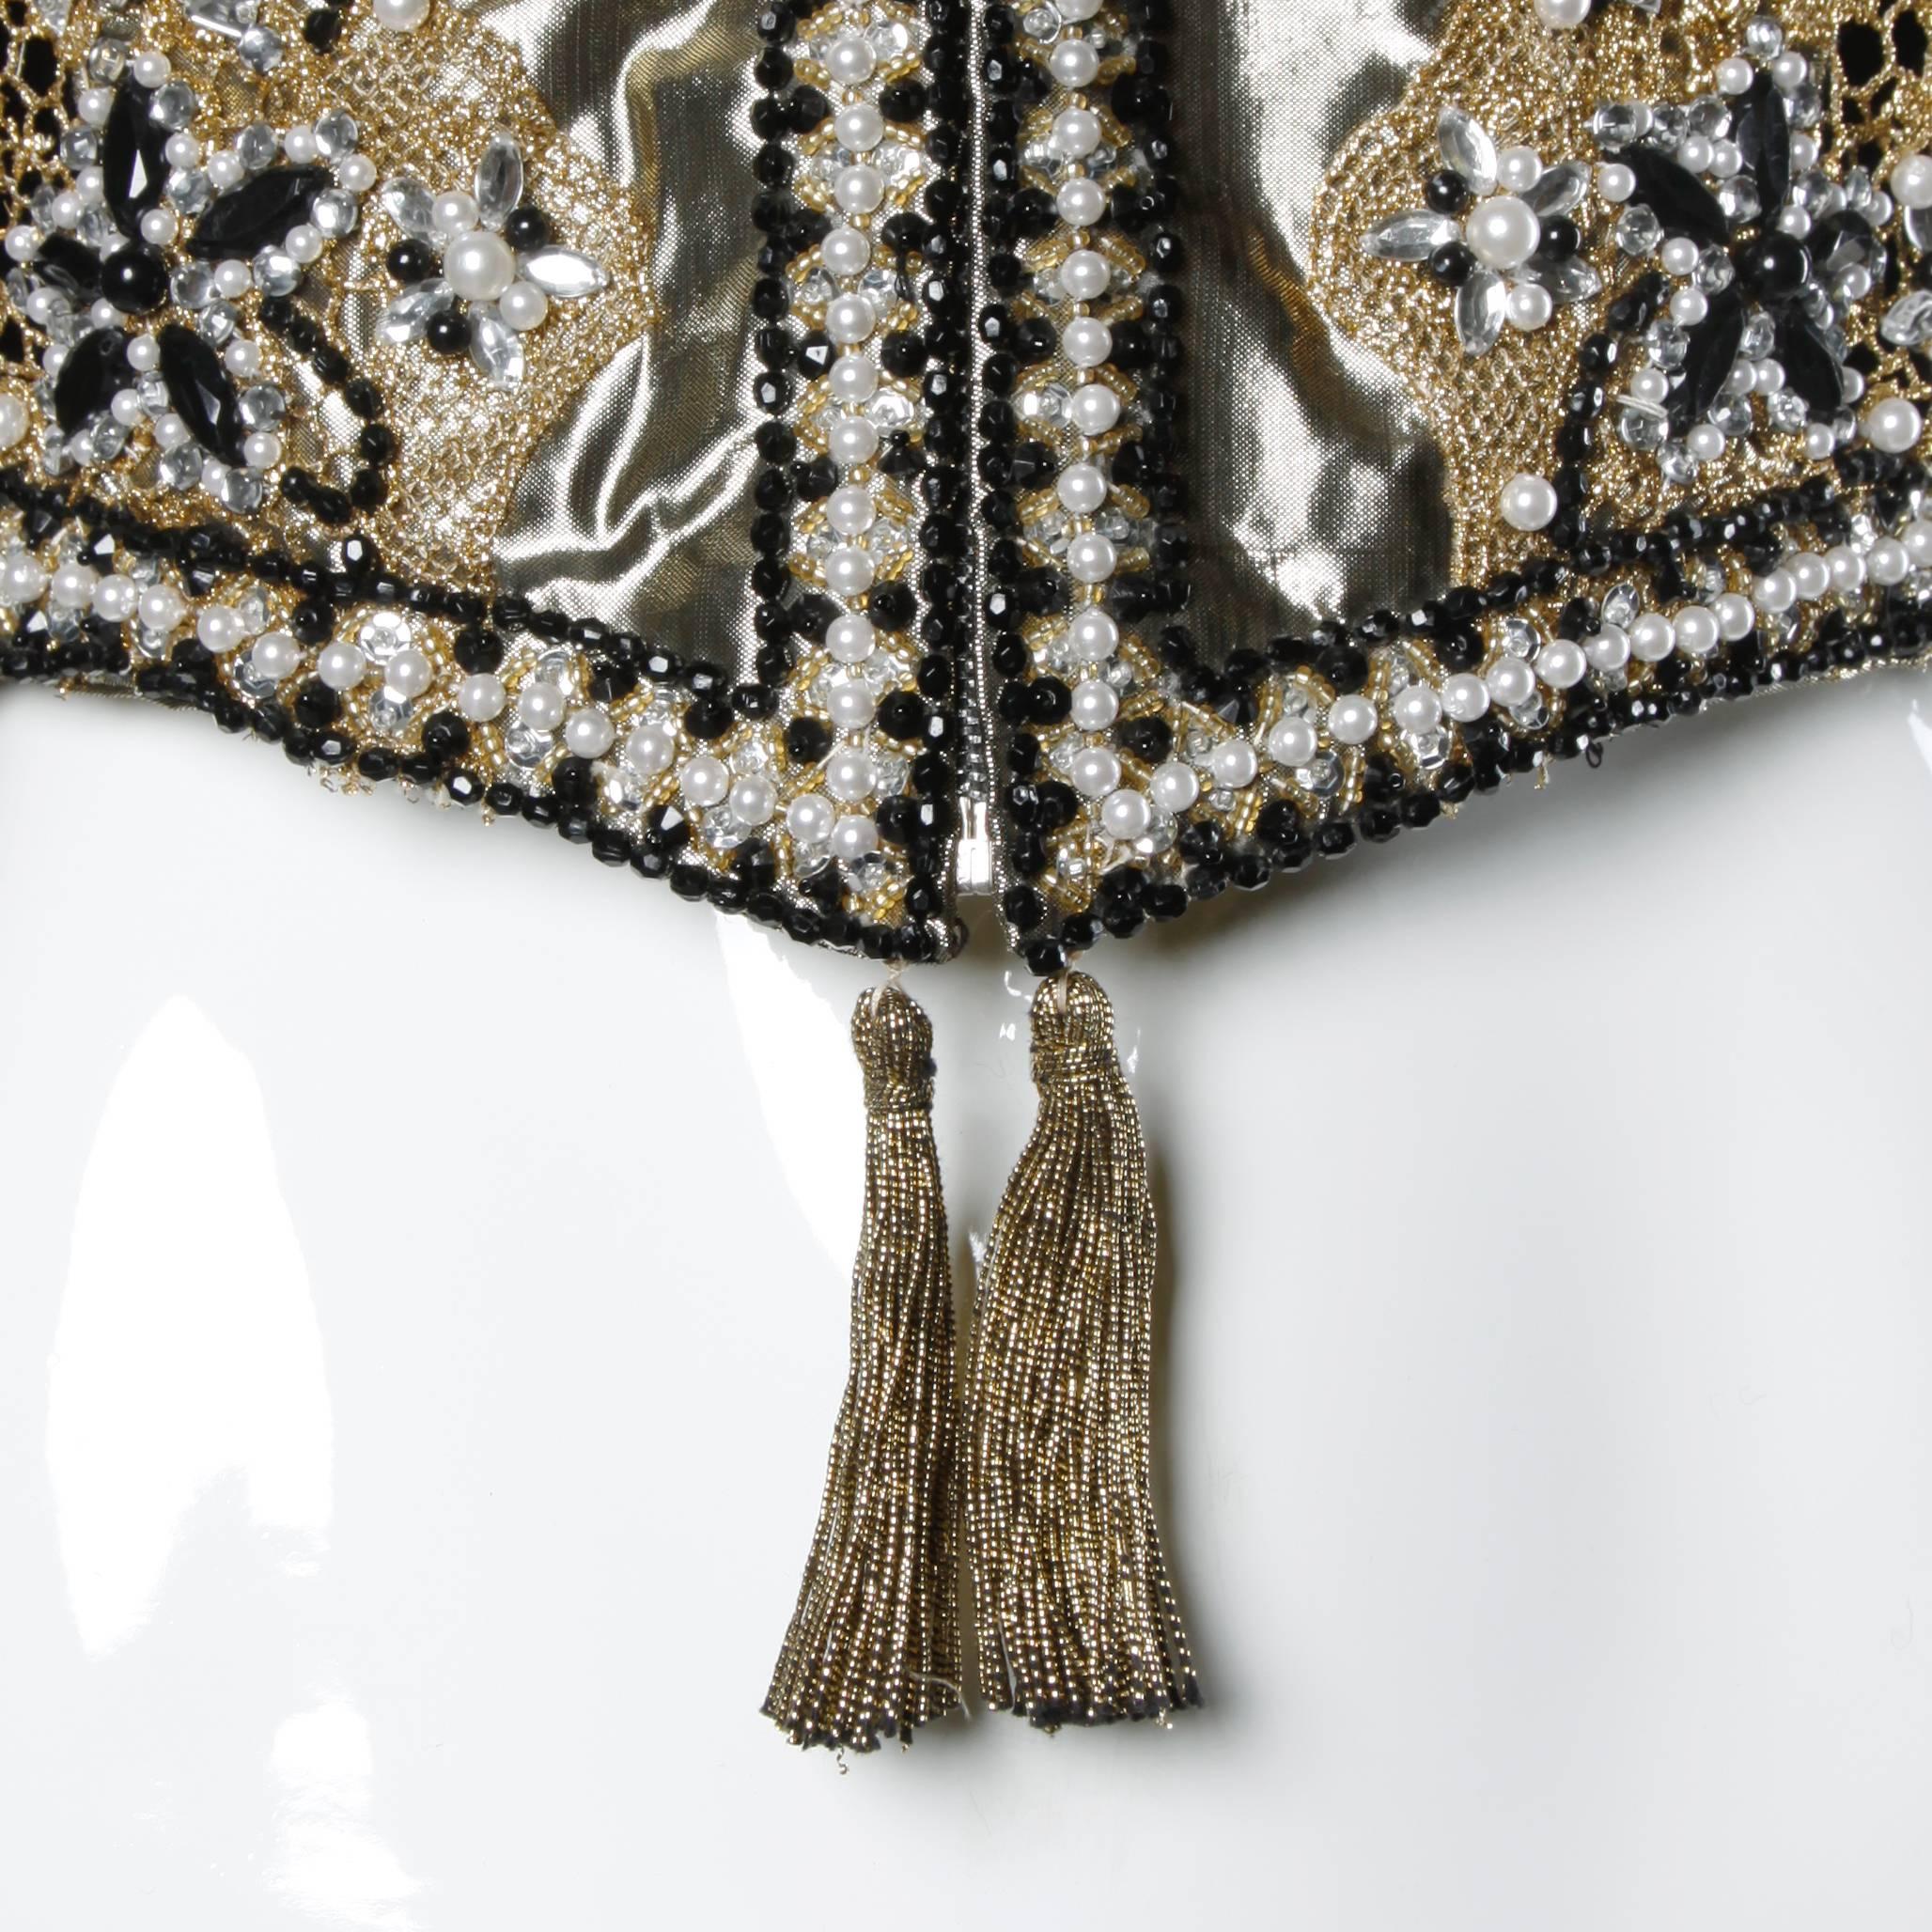 Matador-inspired rock star trophy jacket in metallic gold and black. Heavily embellished design with rhinestones and beadwork. Gold tassel detail at the bottom of the zipper.

Details:

Fully Lined
Shoulder Pads Sewn Into Lining
Front Metal